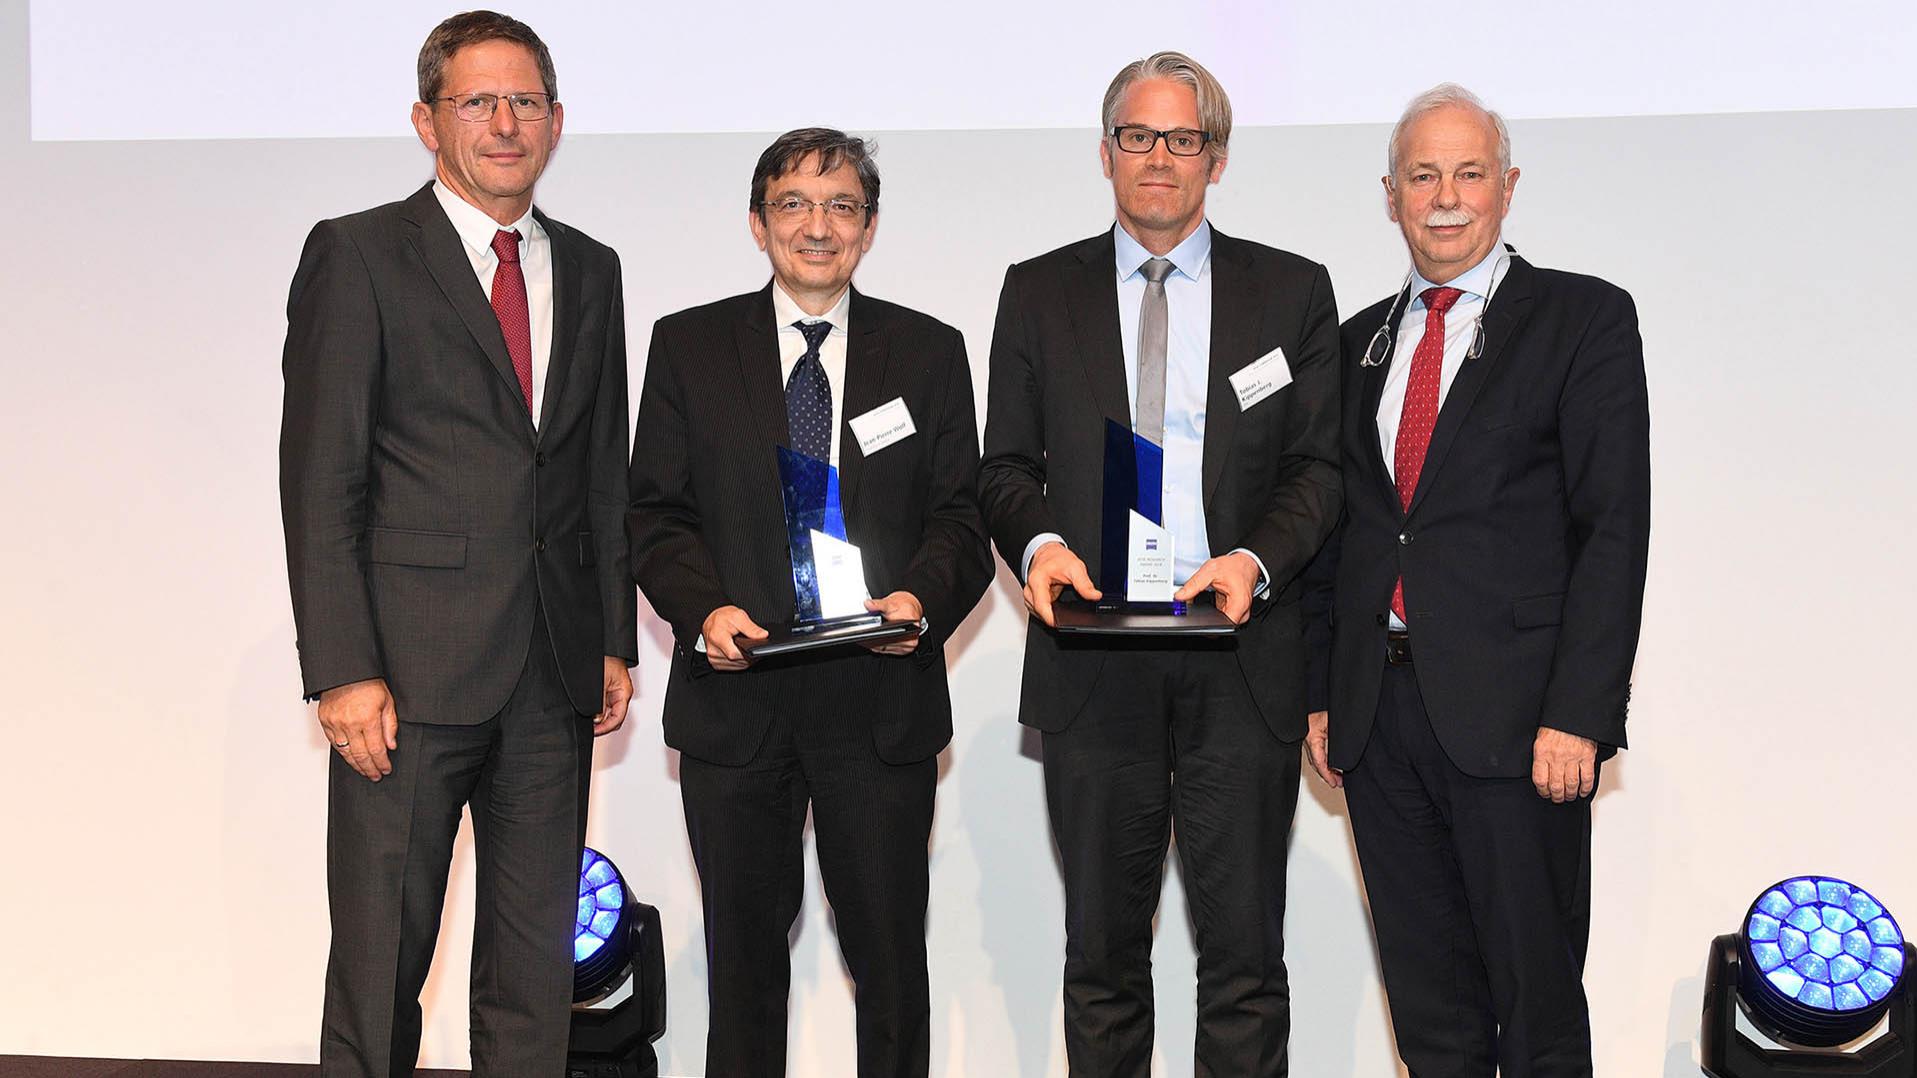 ZEISS Research Award Ceremony: Dr. Jean Pierre Wolf (Institute for Biophotonics at the University of Geneva) and Dr. Tobias Kippenberg (Laboratory of Photonics and Quantum Measurements at École Polytechnique Fédérale de Lausanne – EPFL; 2nd and 3rd from left). Dr. Michael Kaschke, President and CEO of ZEISS (left), and speaker Dr. Jürgen Mlynek, Professor at the Humboldt University of Berlin and former President of the Helmholtz Association, honored the awardwinners.